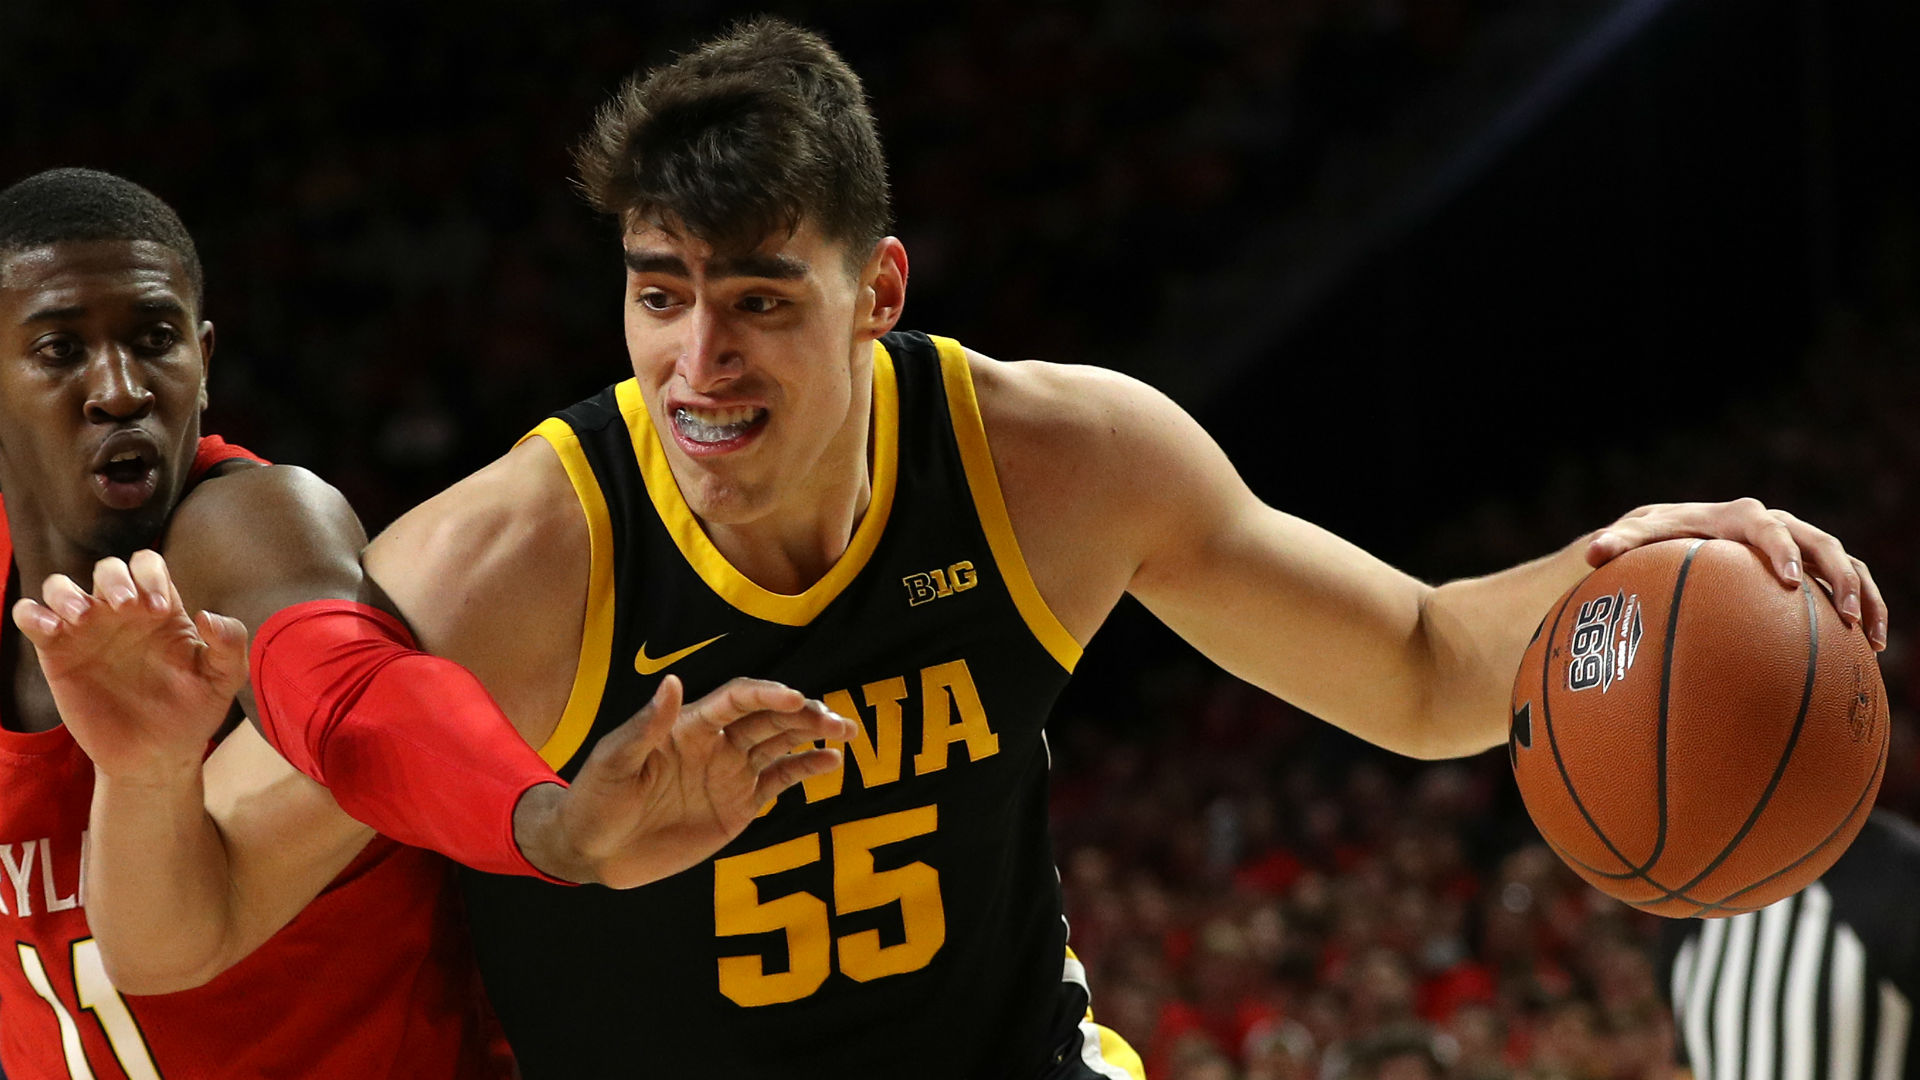 Luka Garza returns to Iowa from the NBA Draft with a new mission